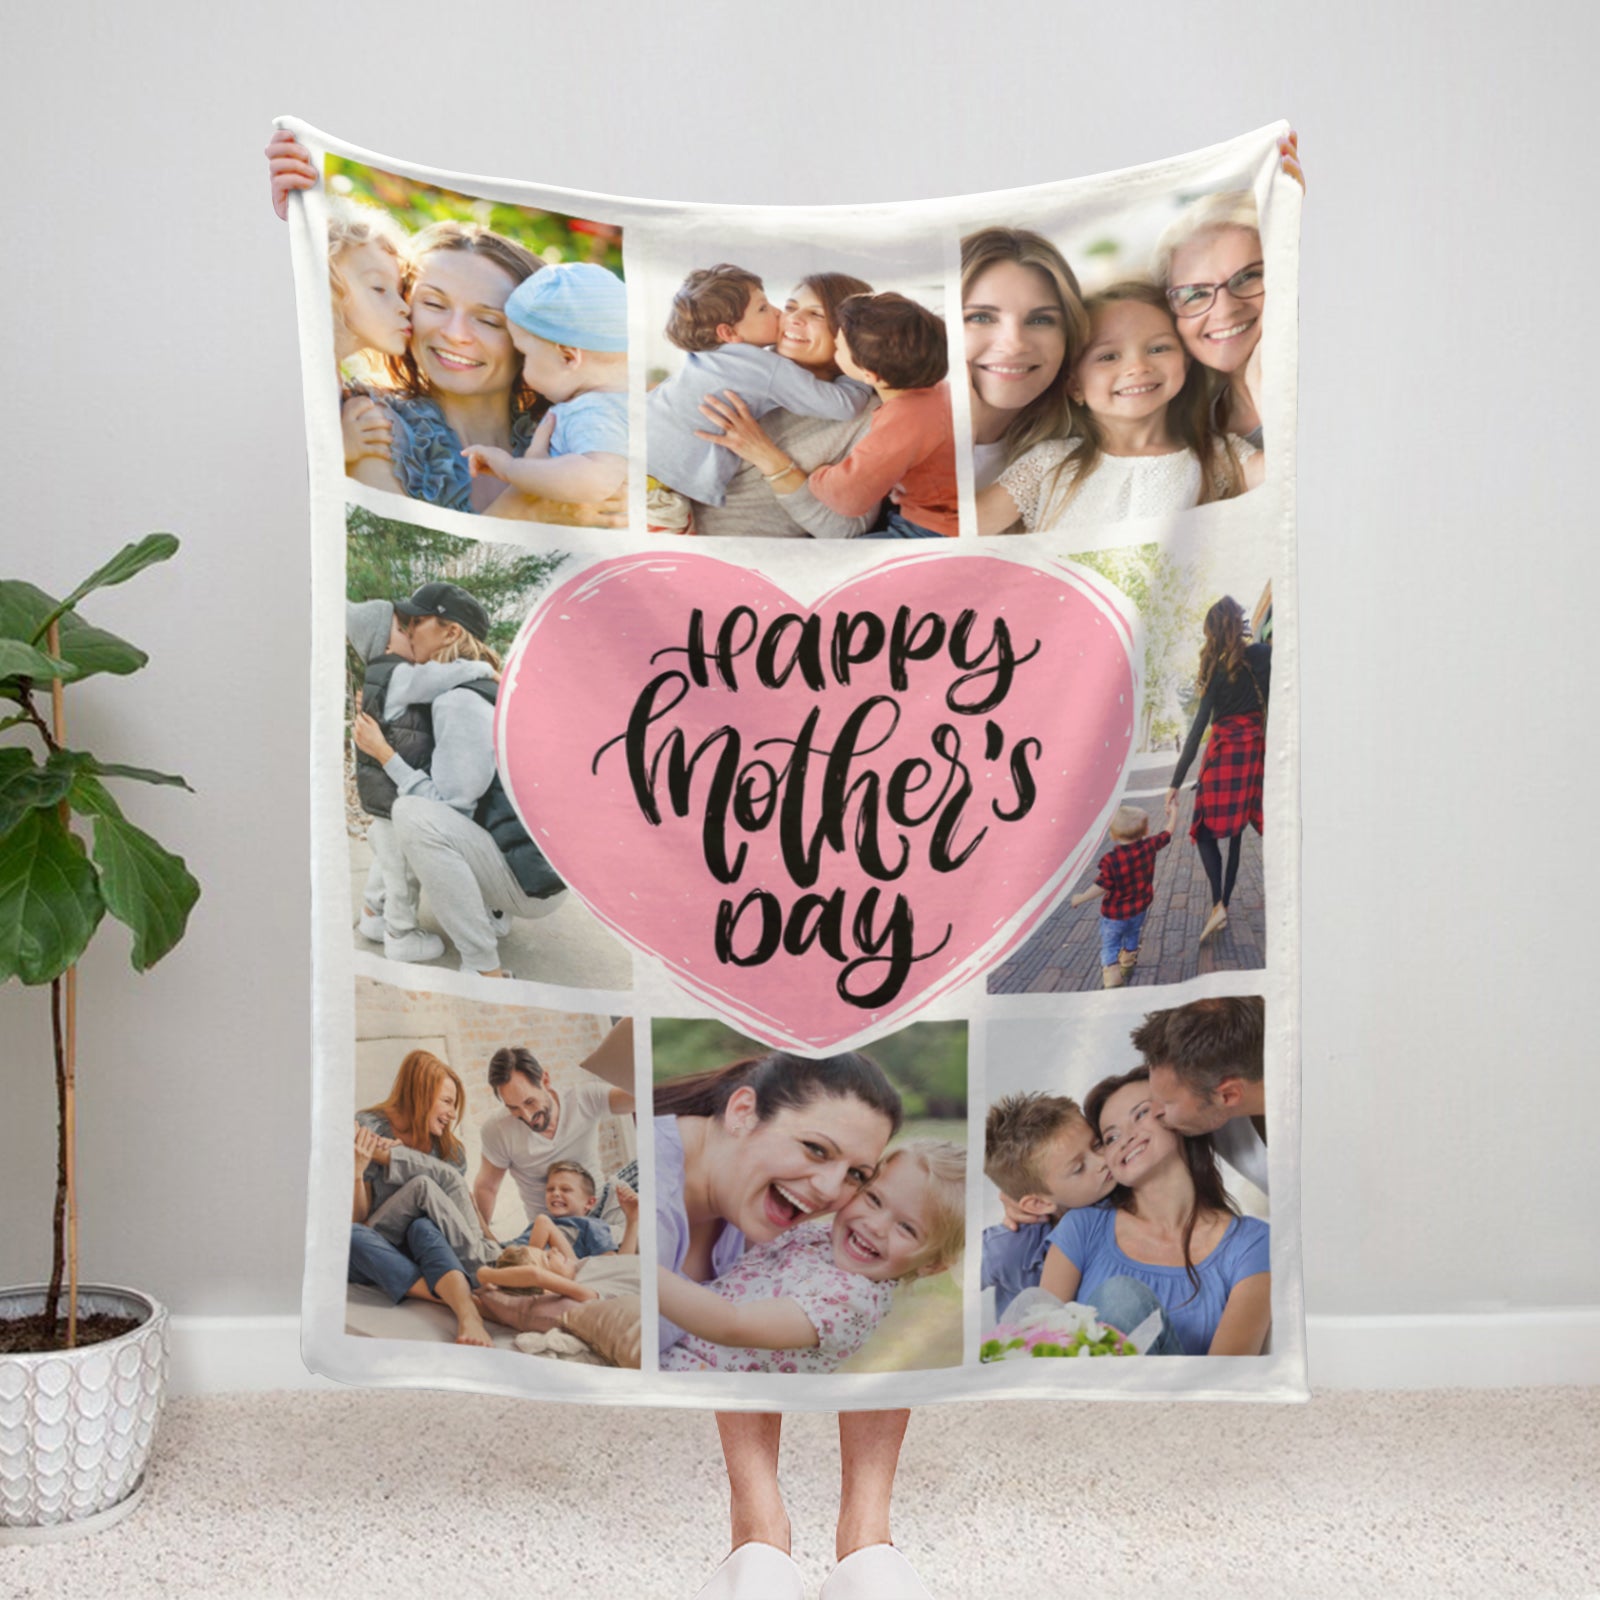 Personalized "Best Mom Ever" blanket with photo，Gifts for Mom , Perfect for Mother's Day and birthdays. - colorfulcustom